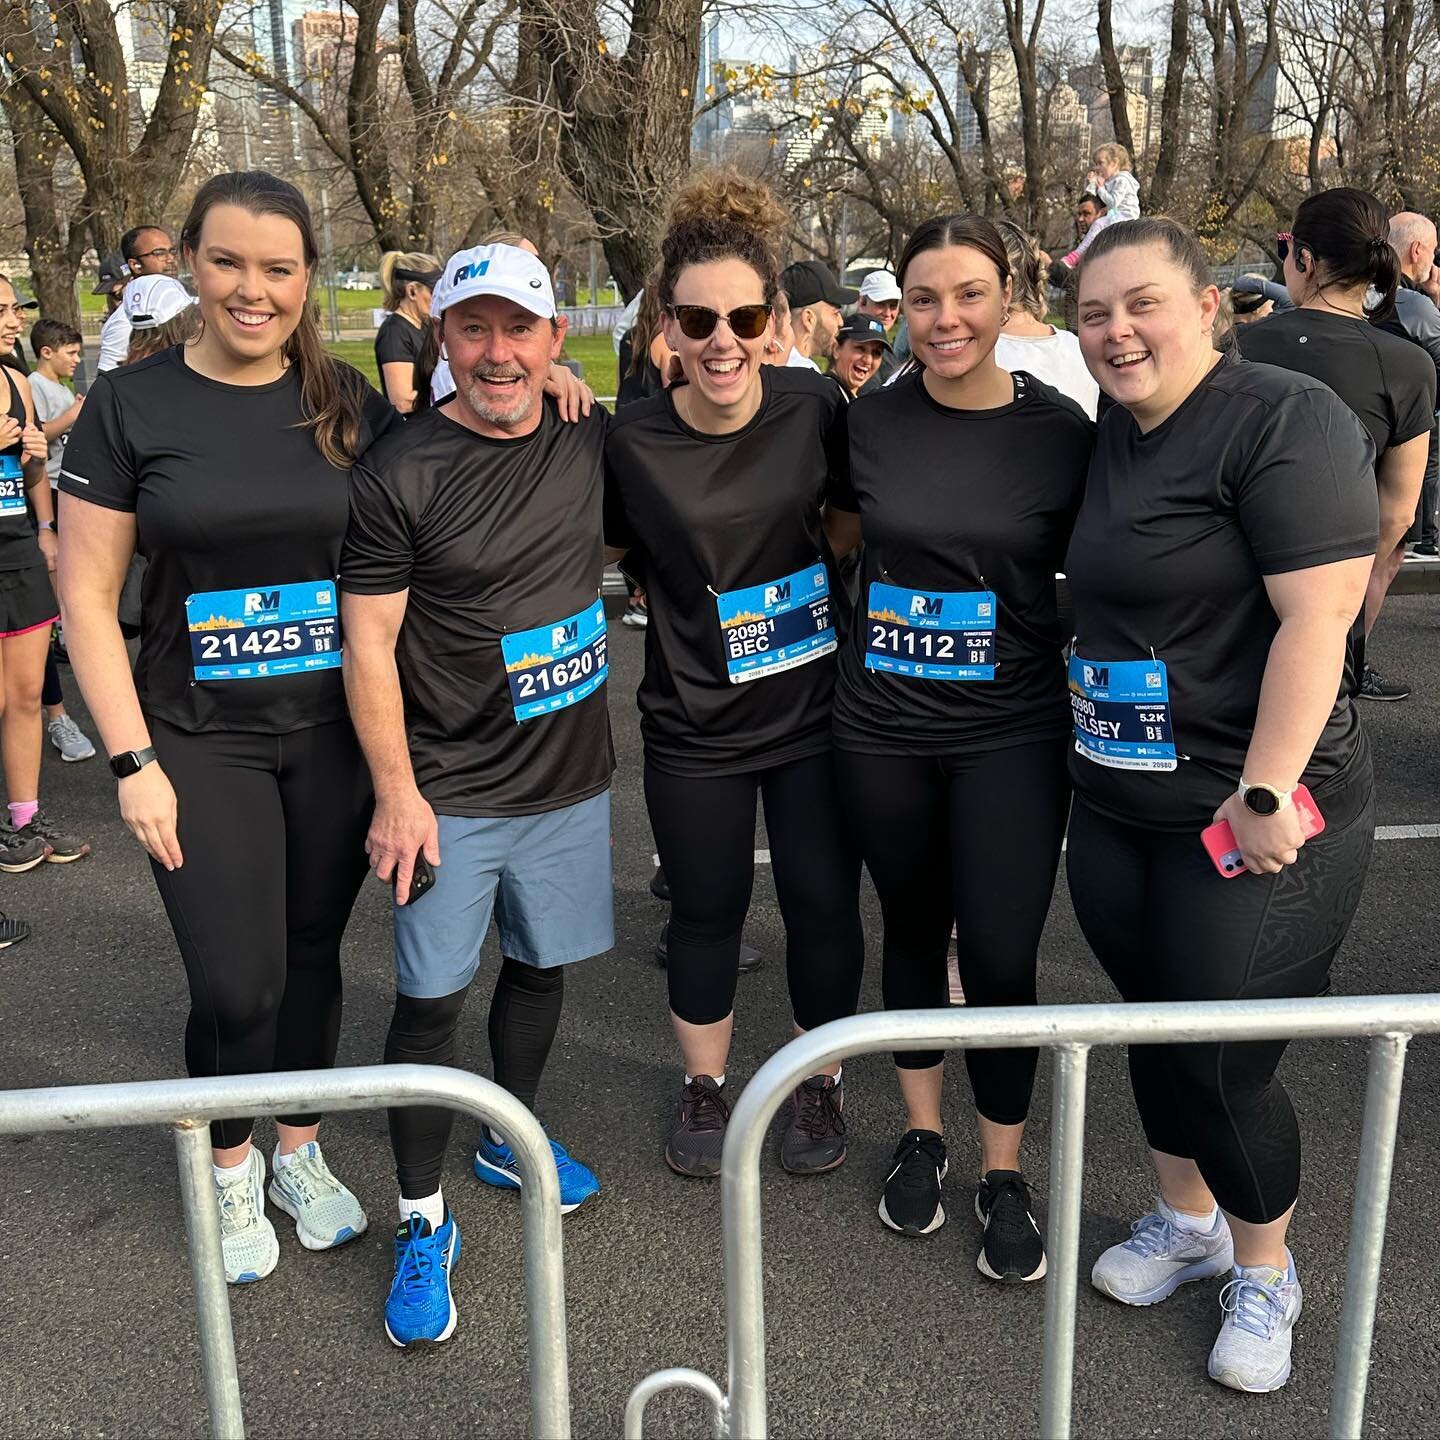 This morning, some of our Fit For Life Crew took on the 21km, 10km or 5km at Run Melbourne. 

These guys have been training hard following our 10 week program in the lead up to this event and we are so proud of the dedication they&rsquo;ve shown &amp